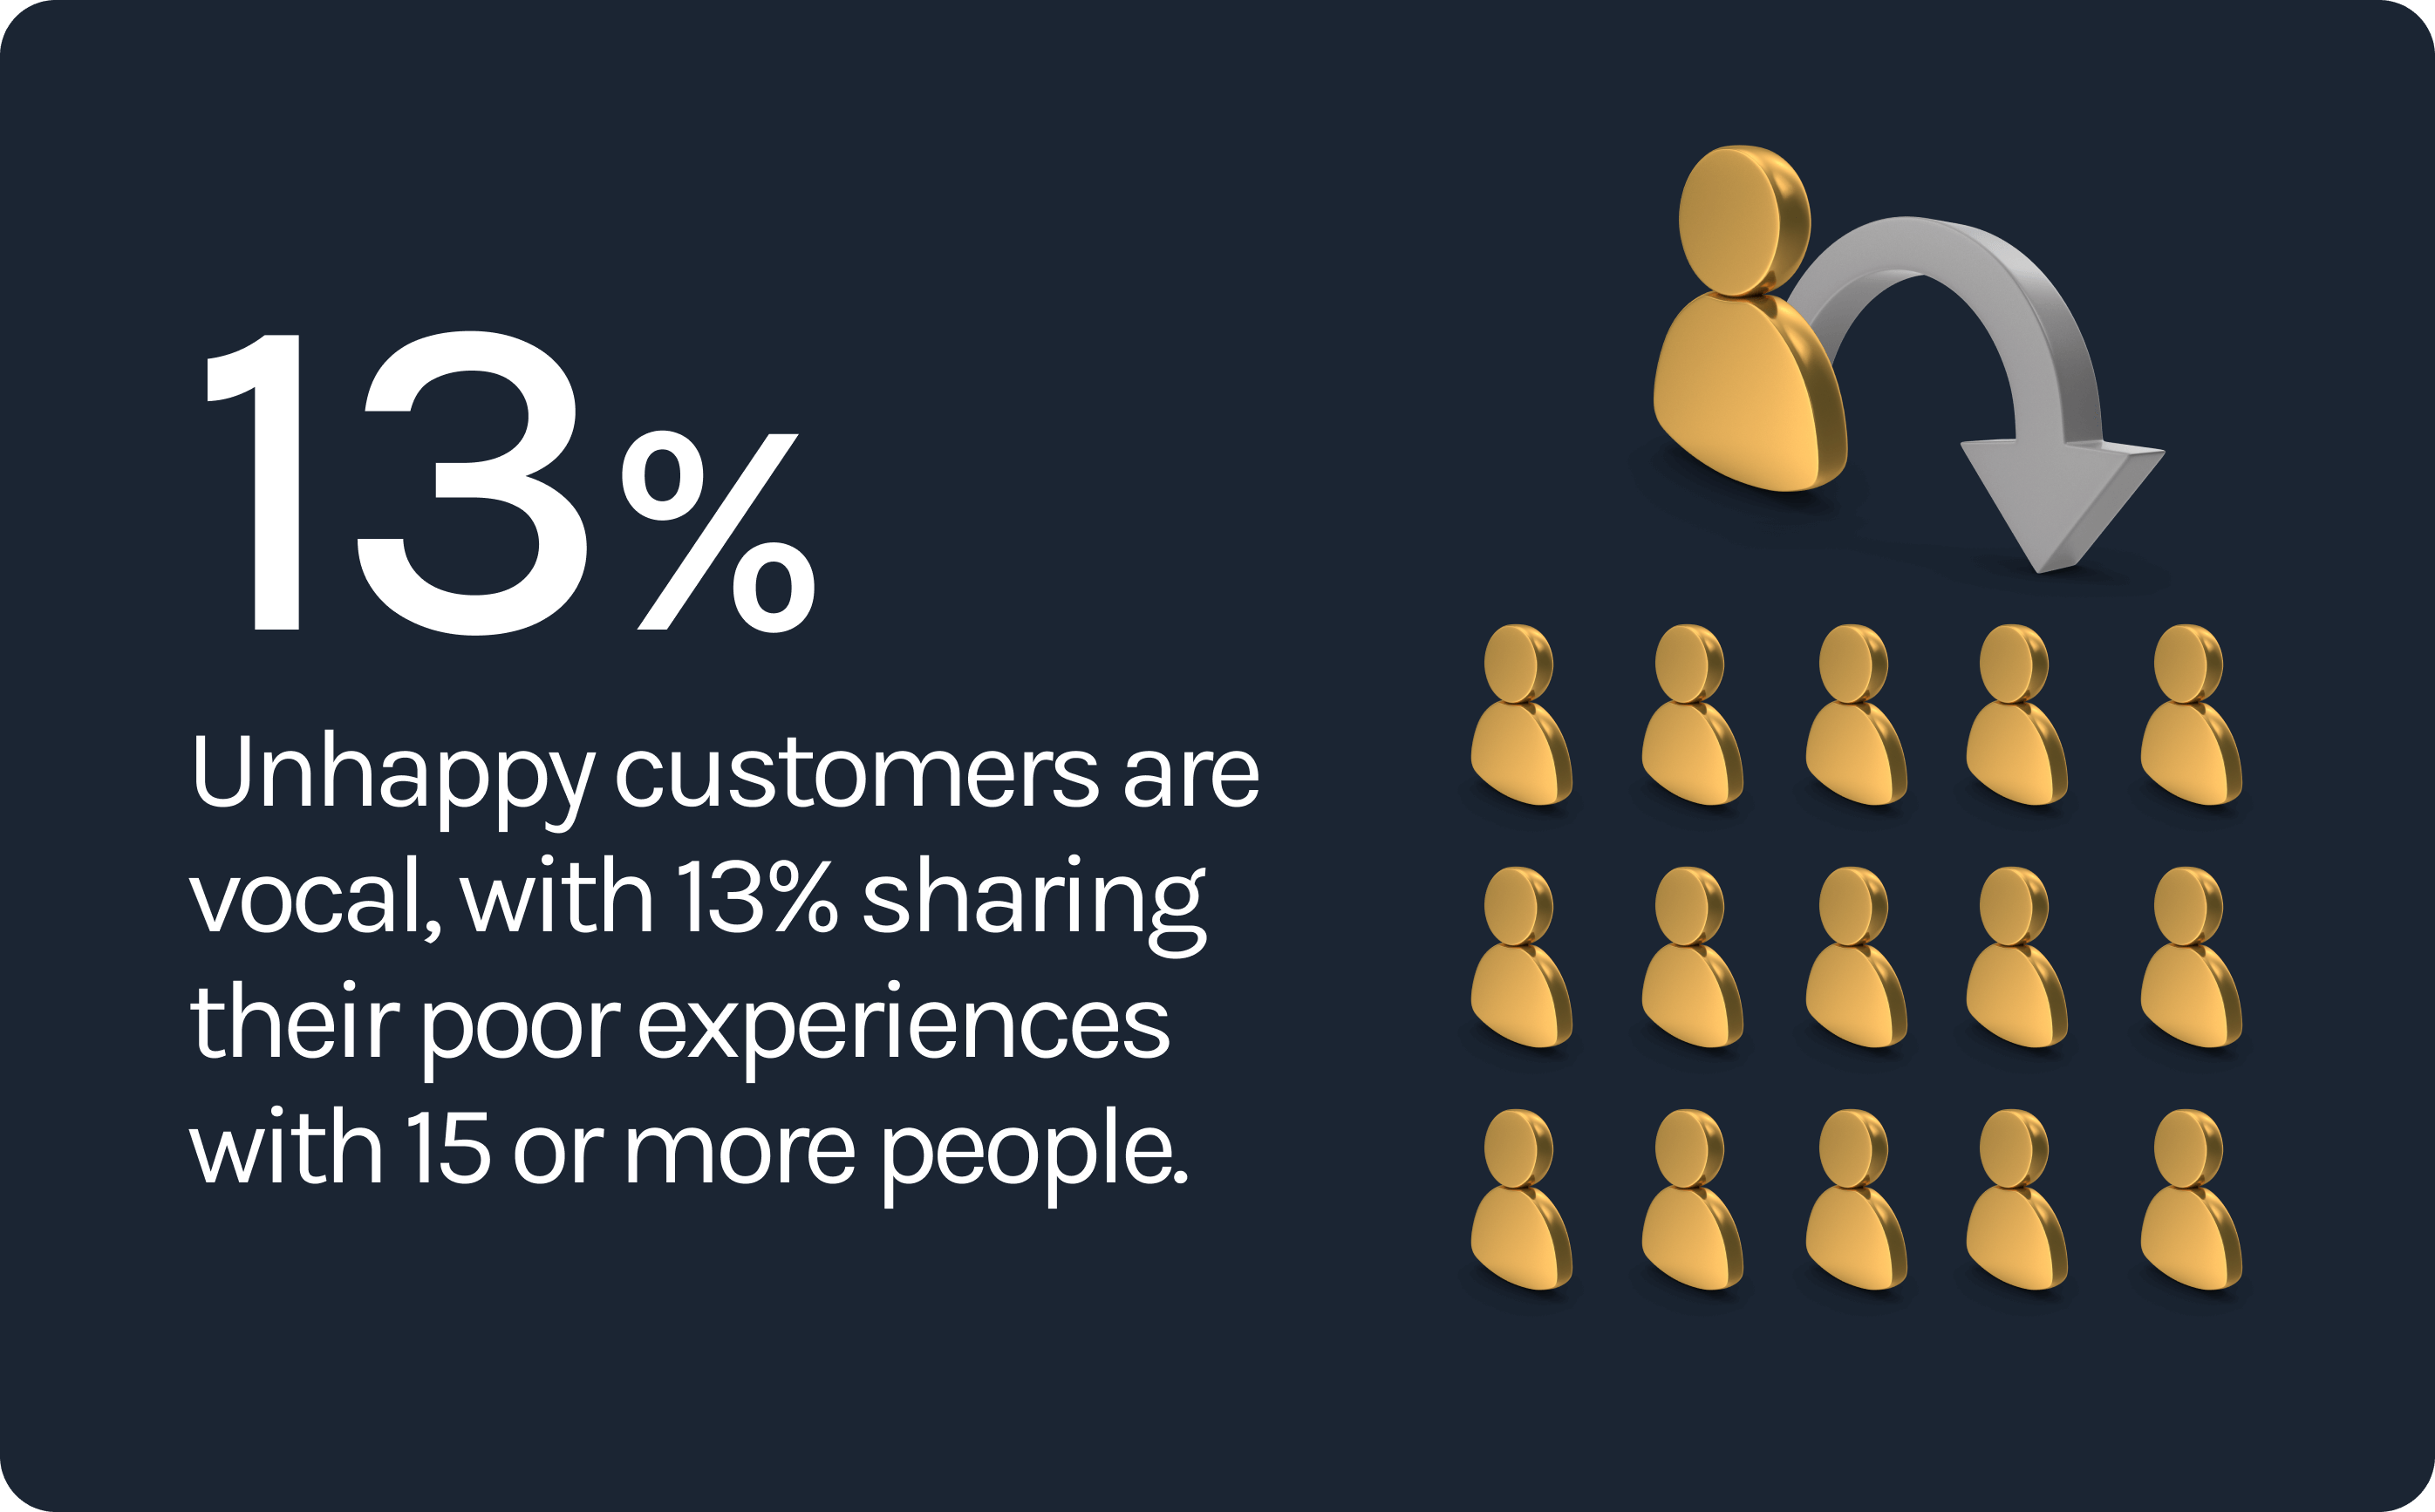 Unhappy customers are vocal, with 13% sharing their poor experiences with 15 or more people.